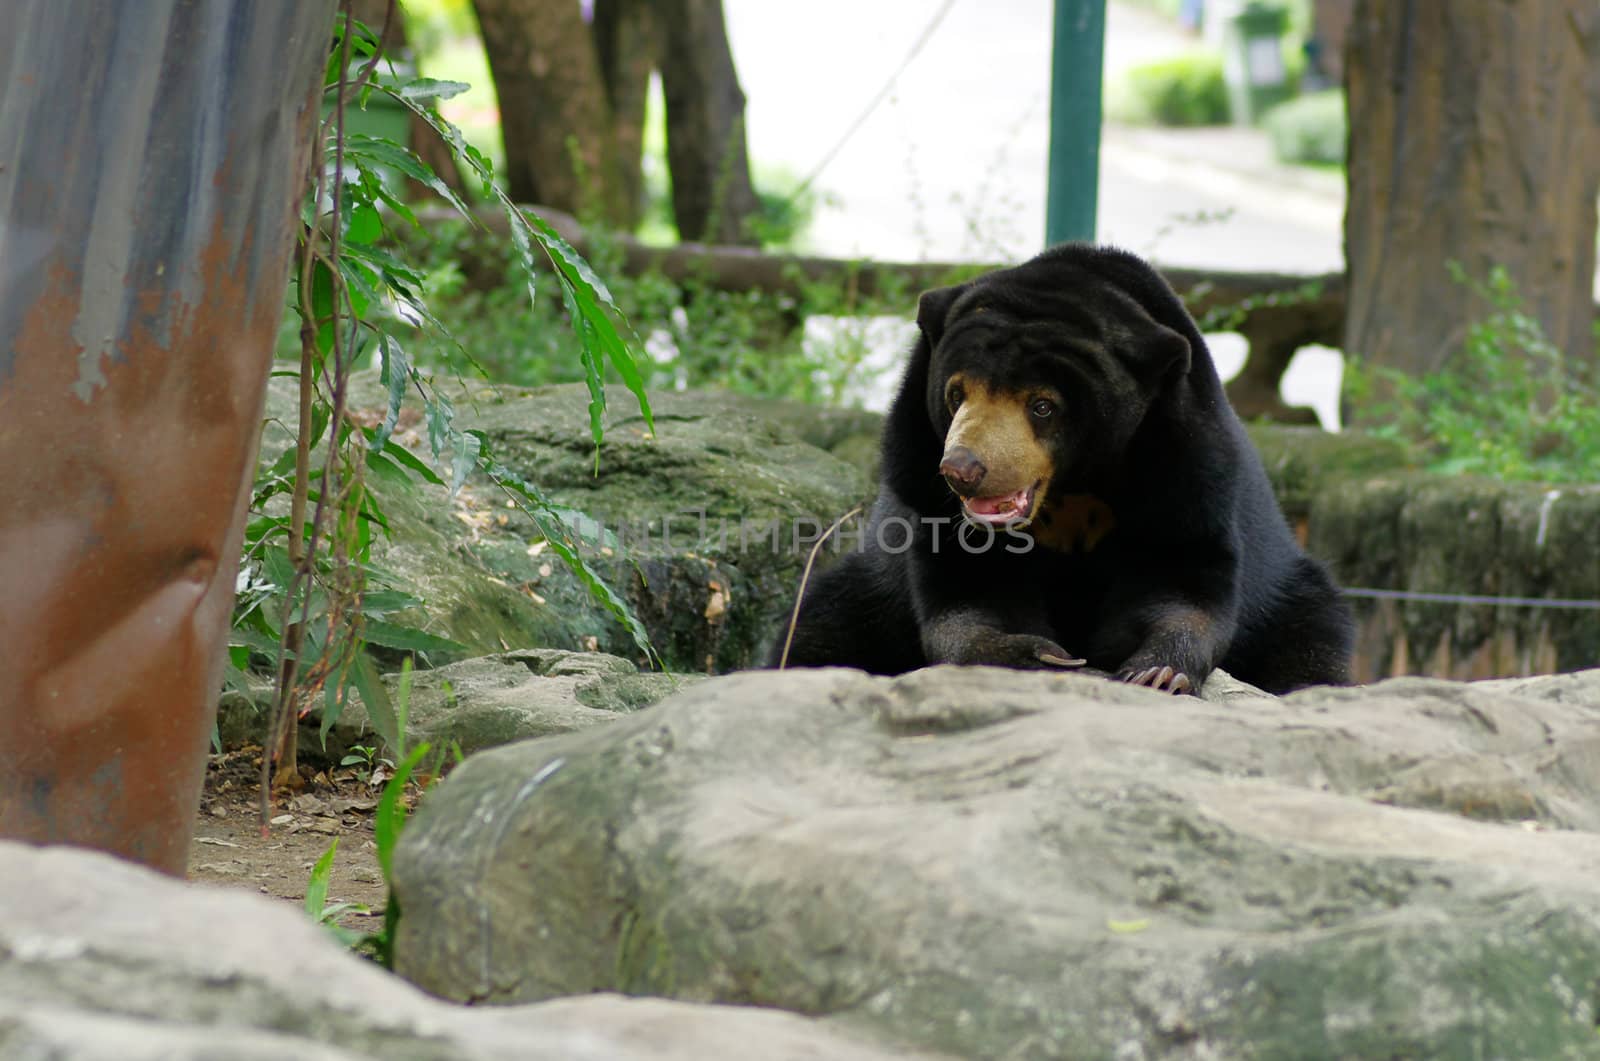 a bear live in Thailand nation zoo